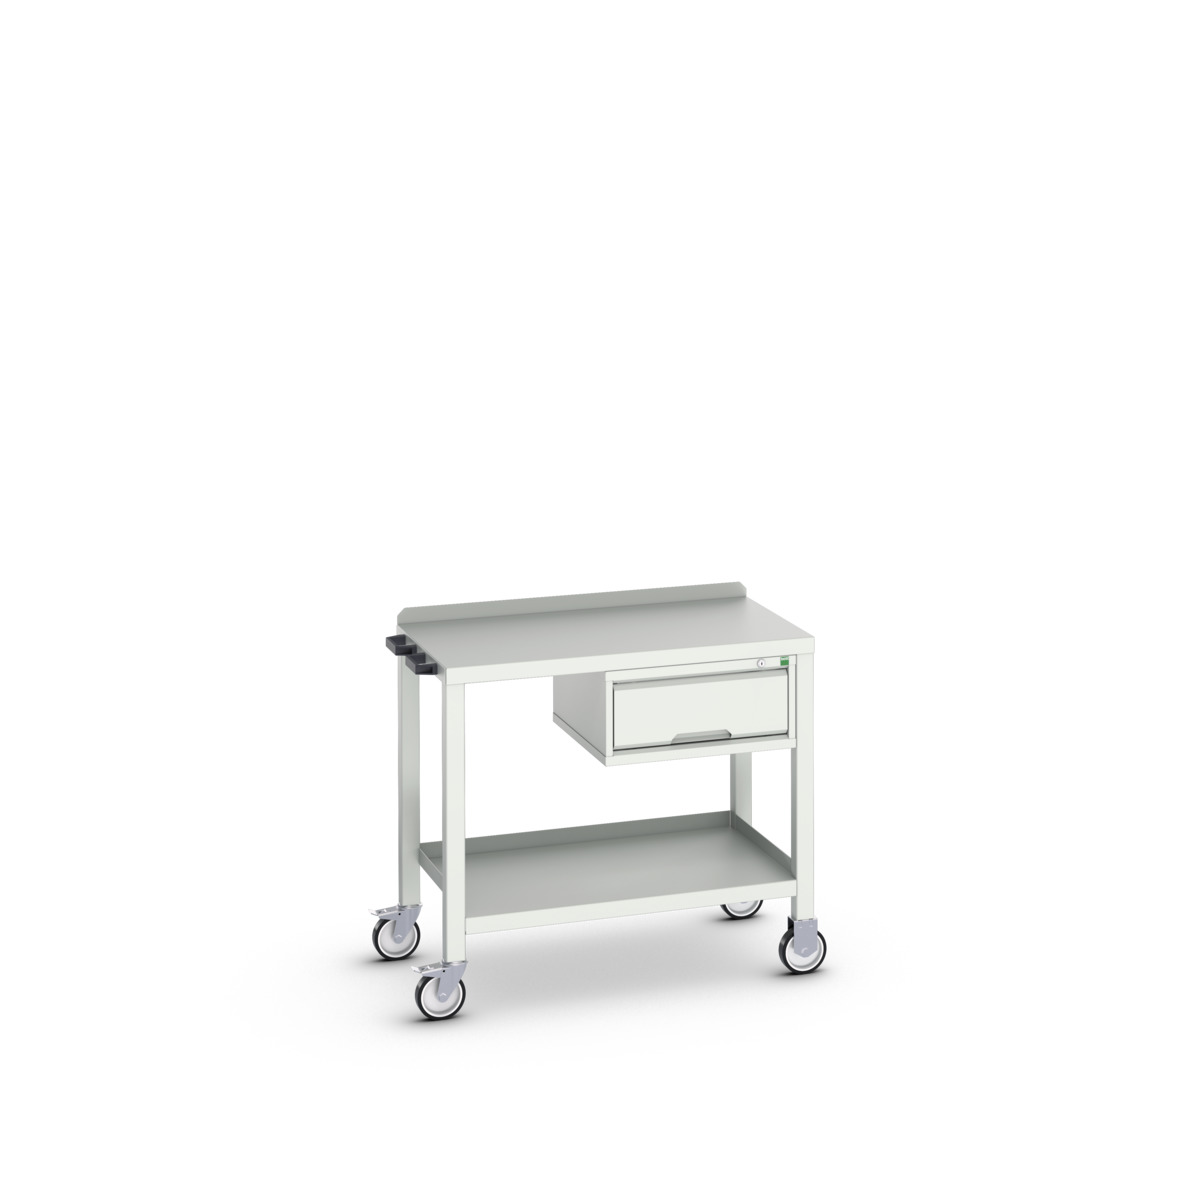 16922800.16 - verso mobile welded bench